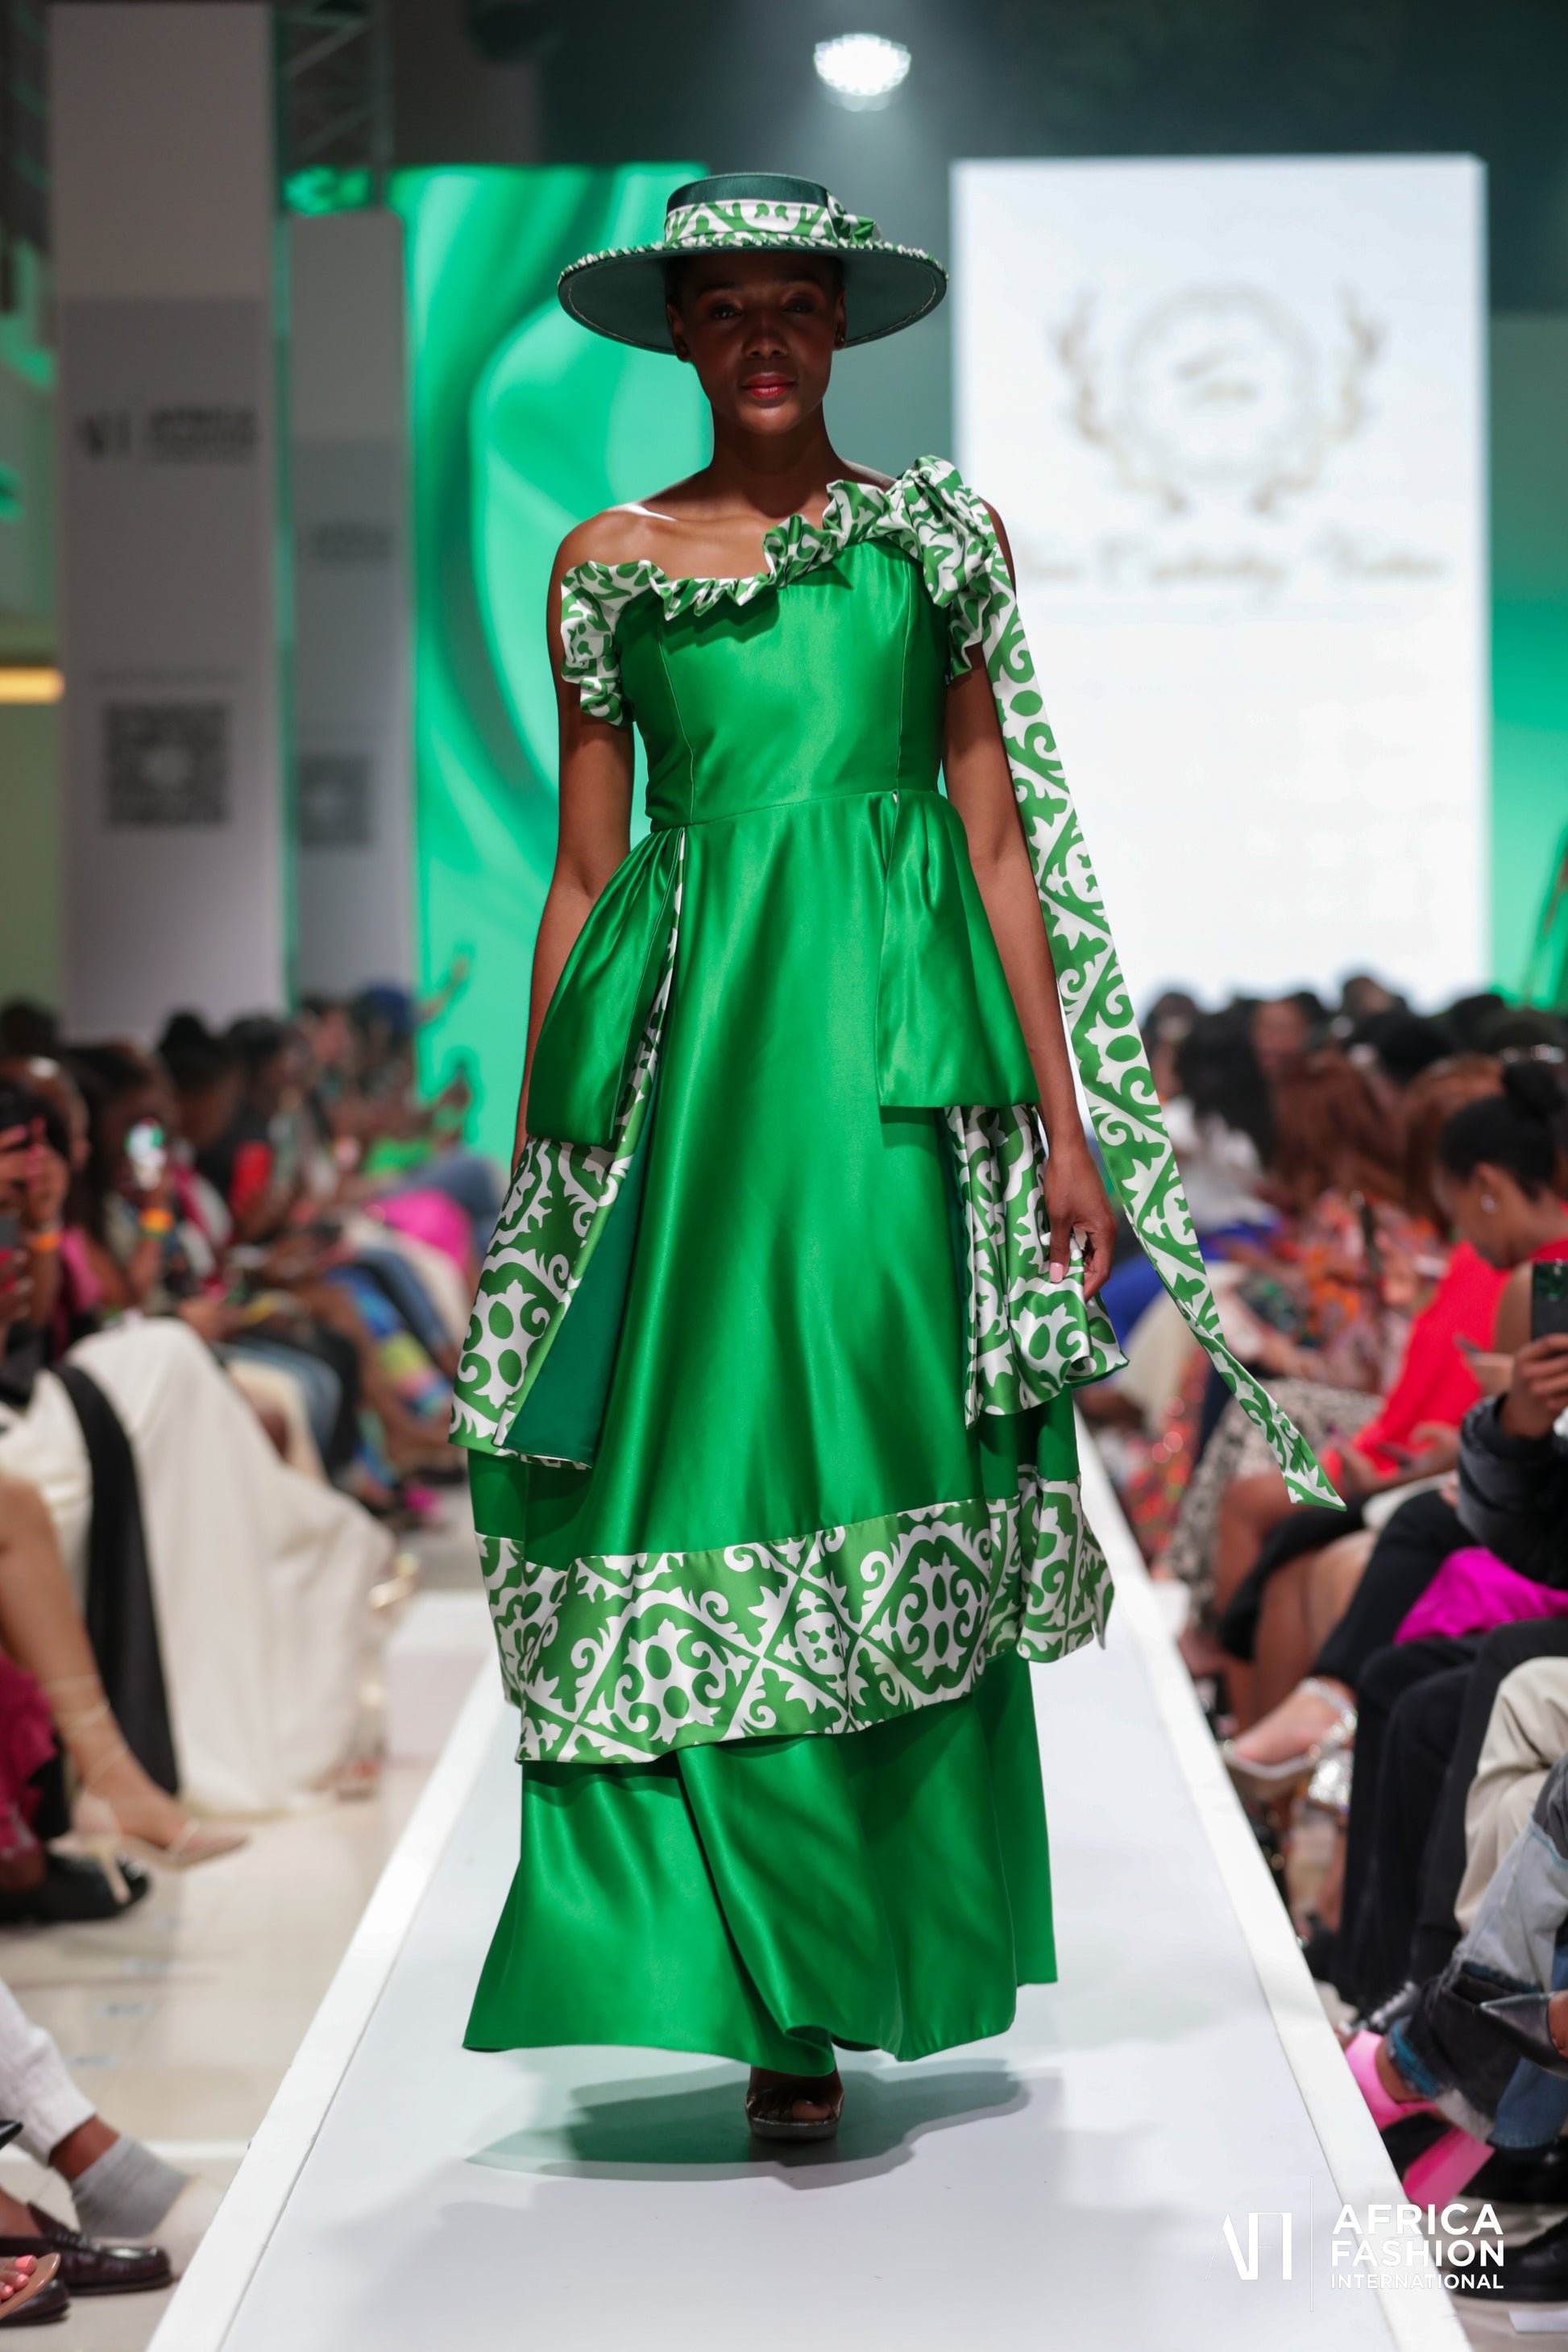 A model wearing the Tumi Captivating Green Dress. The dress features a captivating green and white print on luxurious printed satin. The model is shown posing gracefully, highlighting the flowy tiered-flare silhouette.